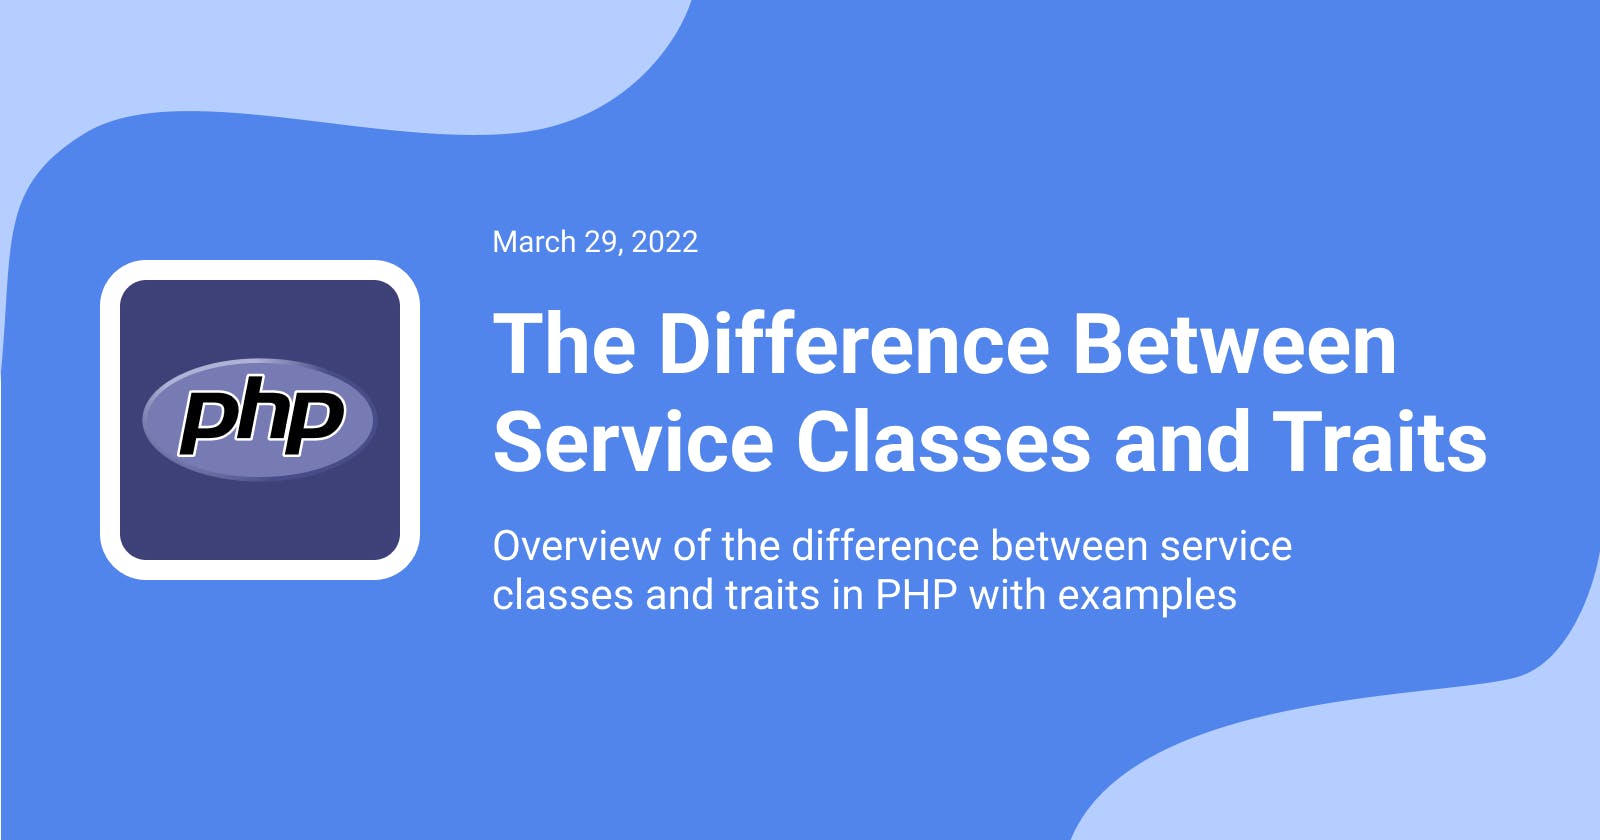 The Difference Between Service Classes and Traits in PHP